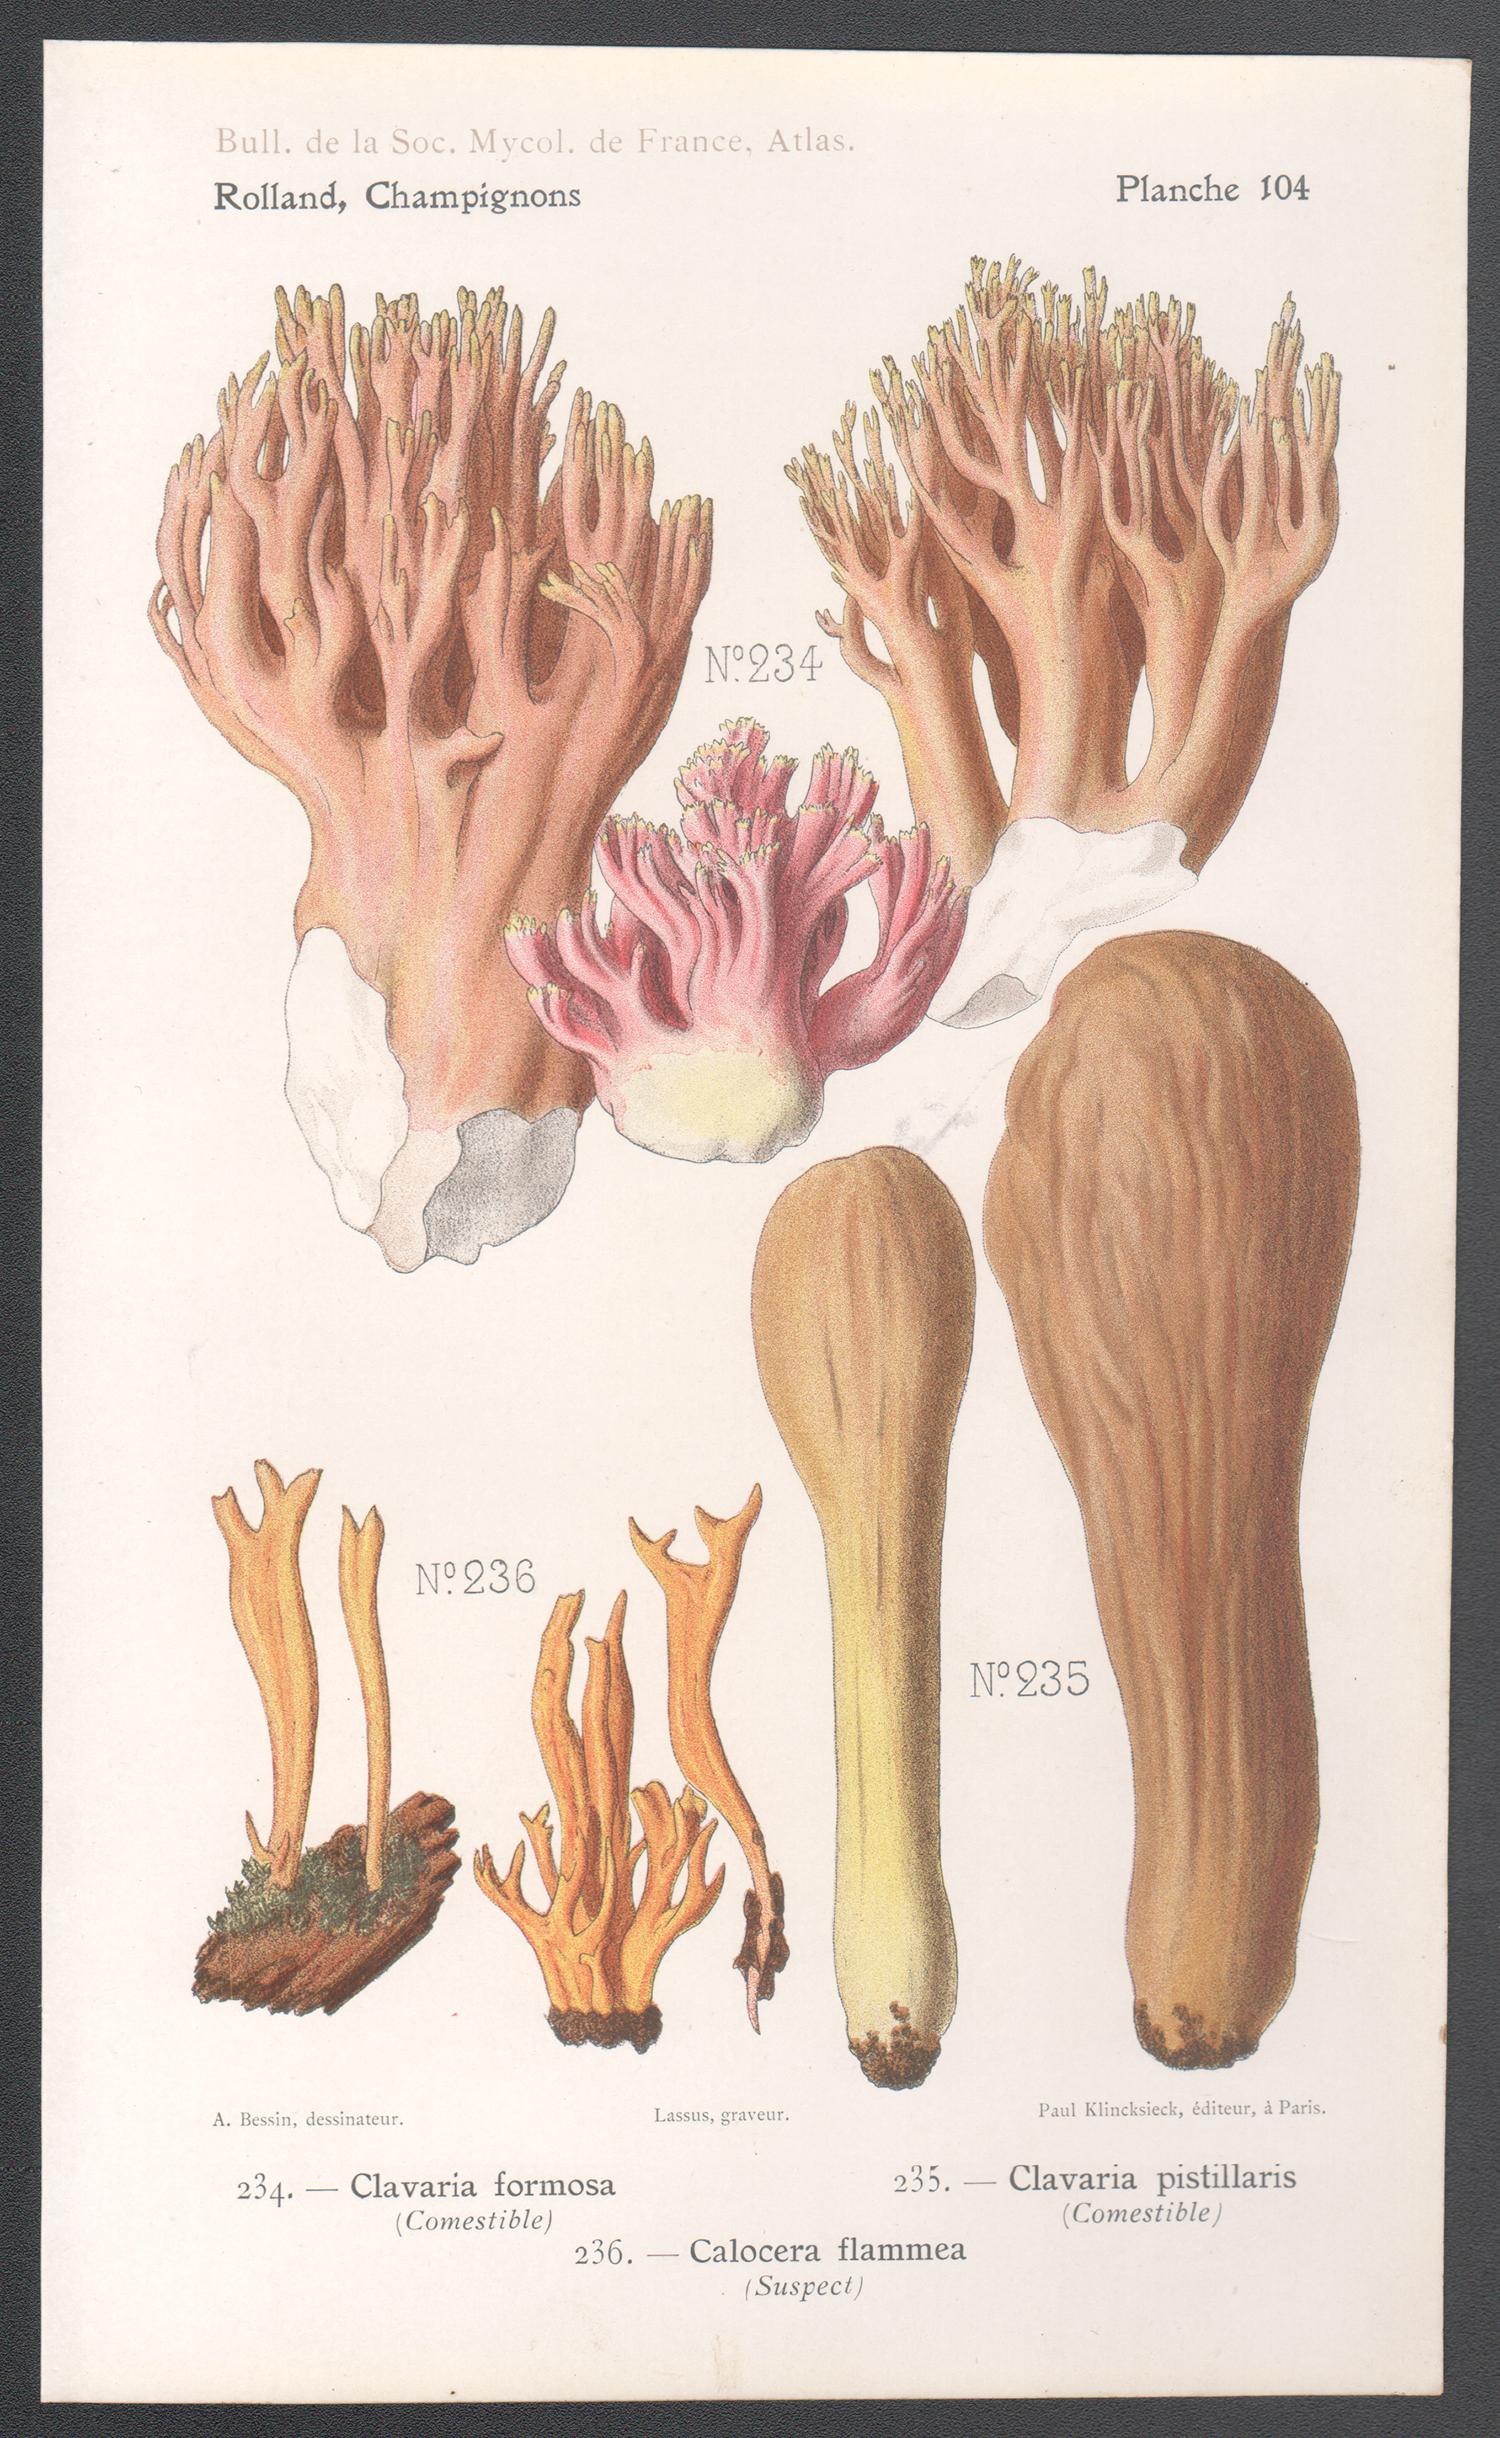 Champignons, French antique mushroom chromolithograph, 1910 - Print by Lassus after Aimé Bessin